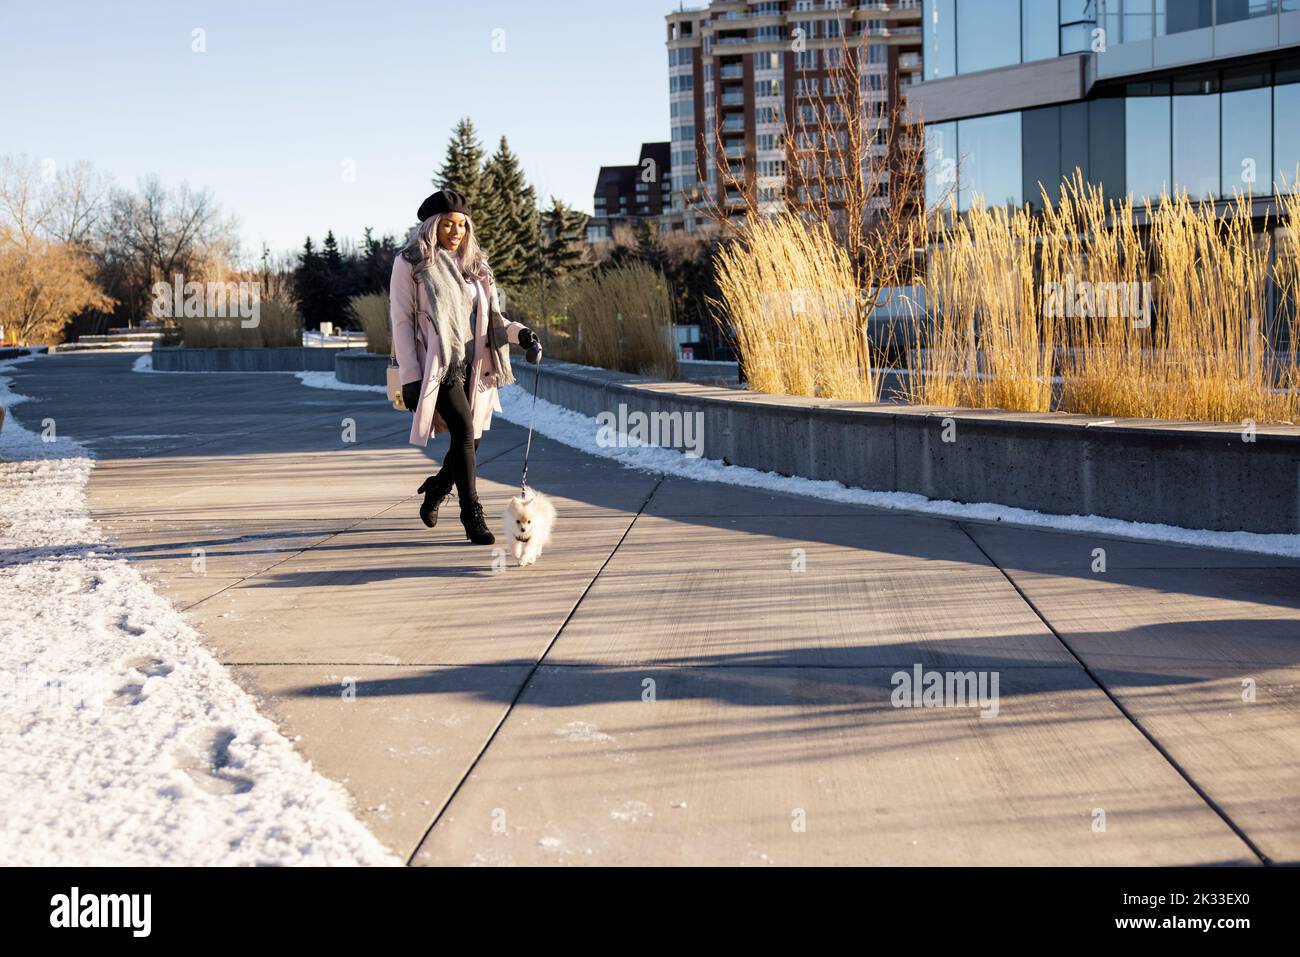 Stylish young woman walking small dog in sunny urban winter park Stock Photo